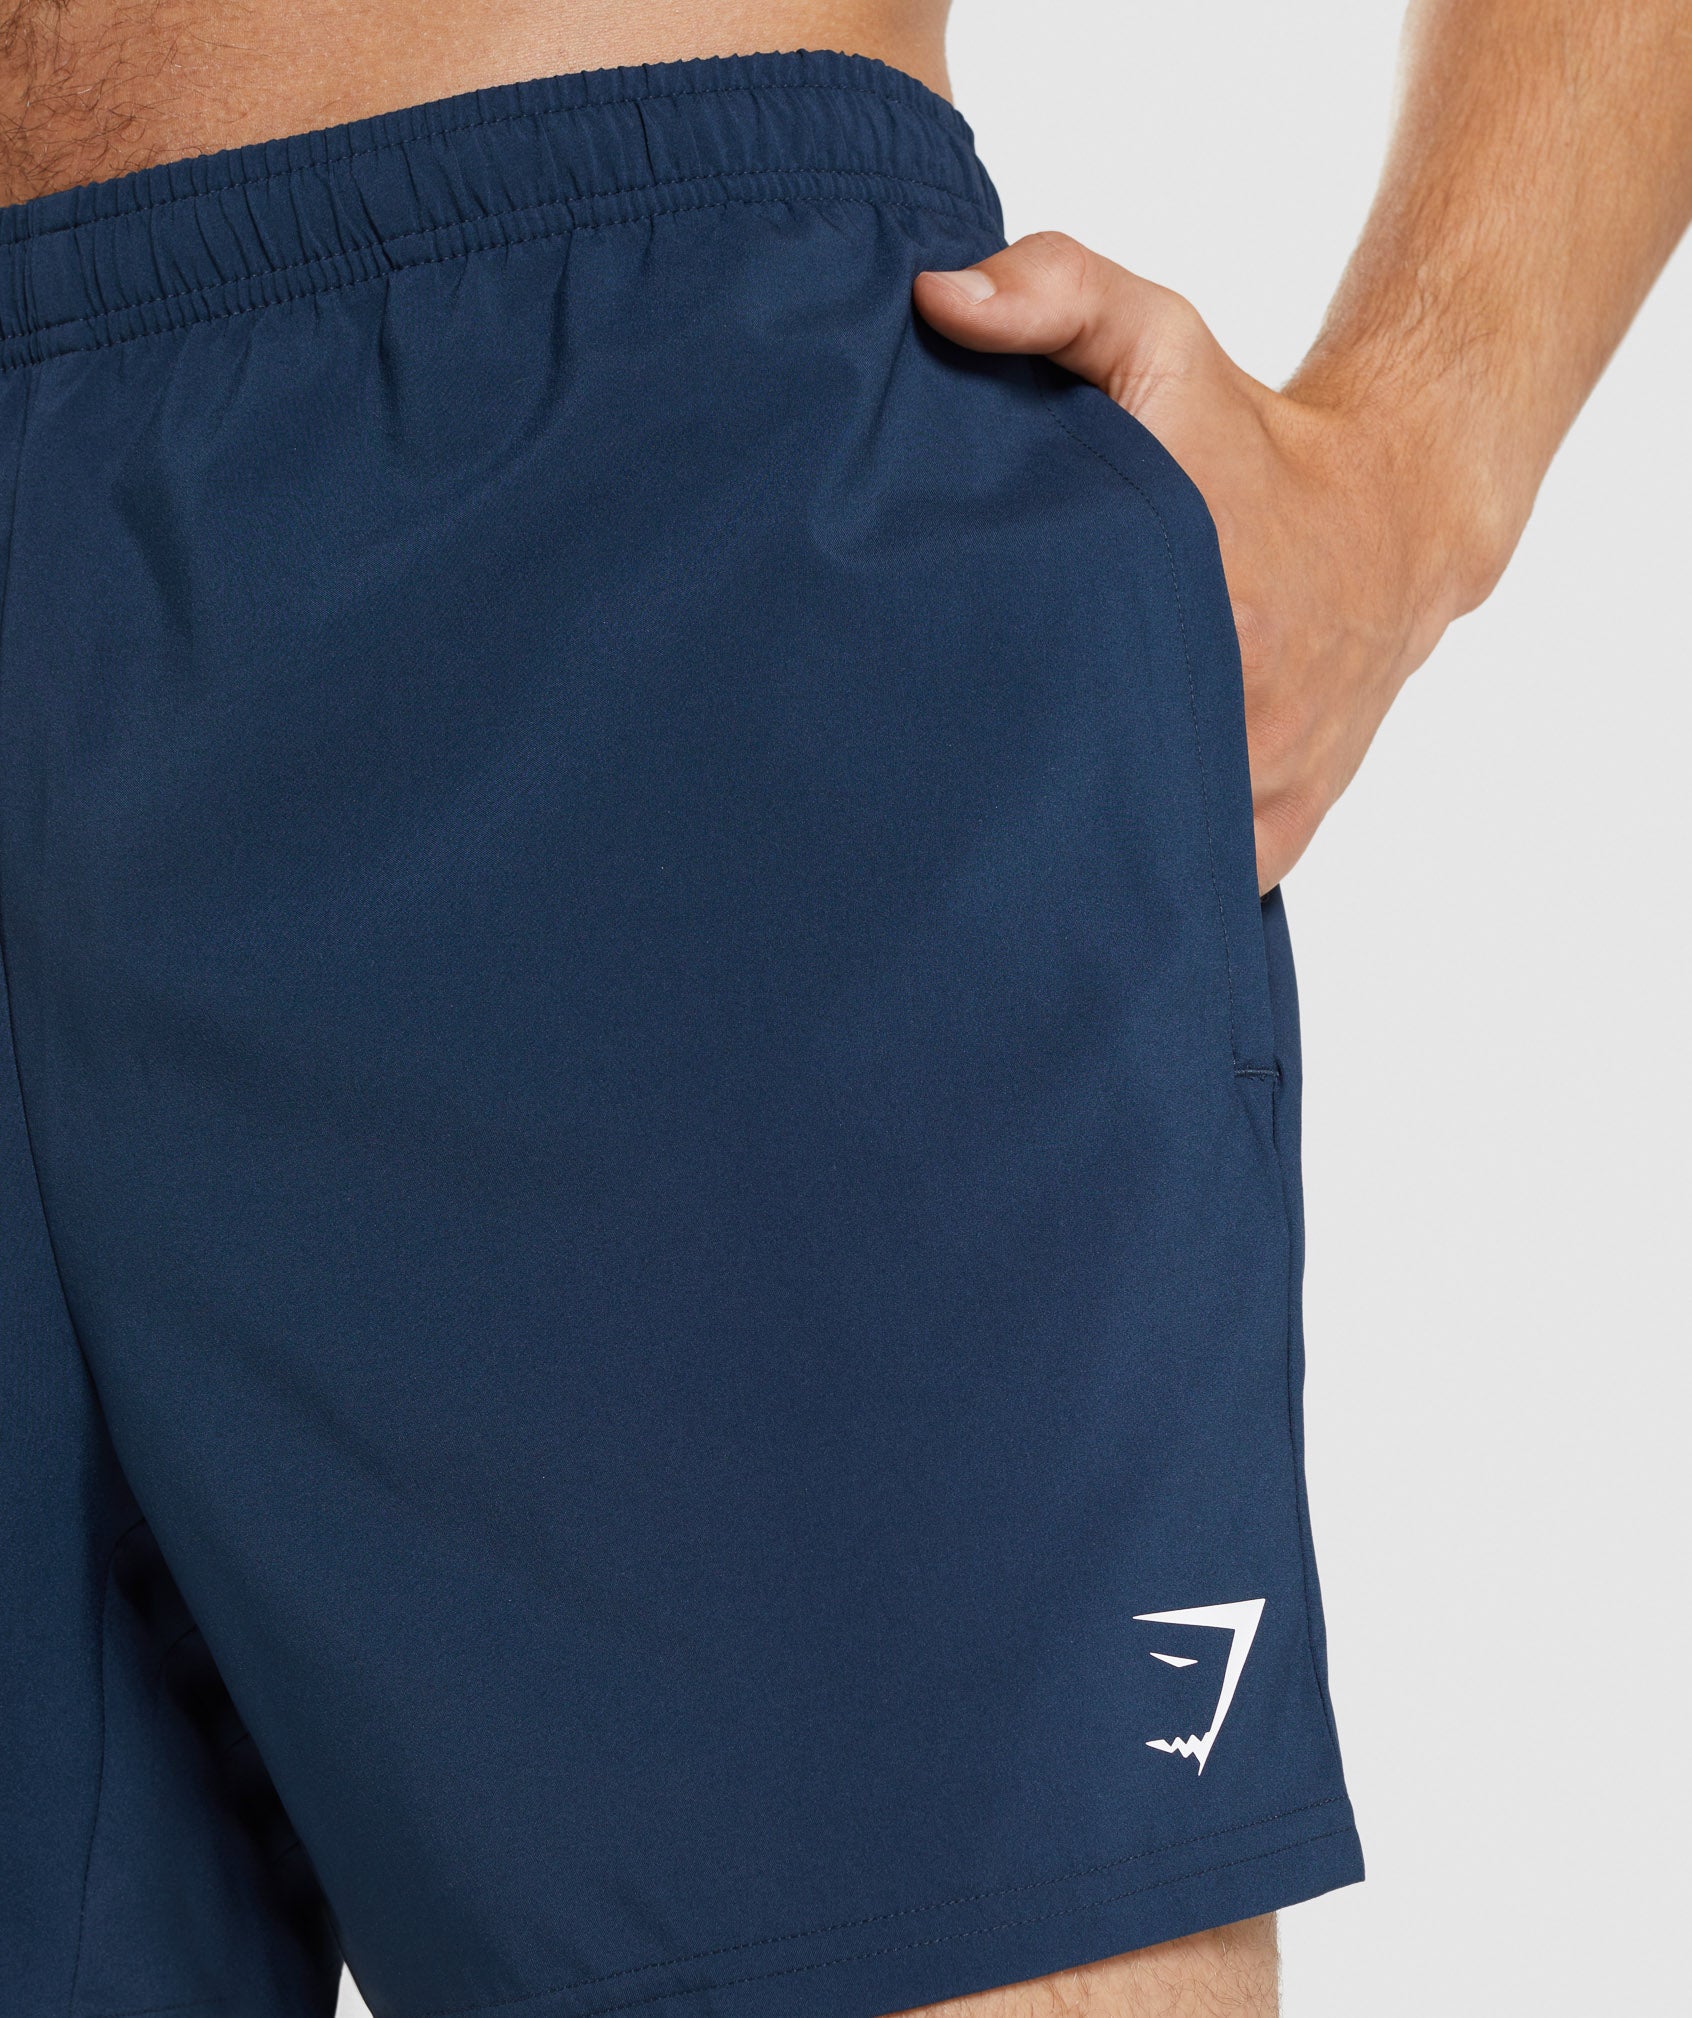 Arrival 5" Shorts in Navy